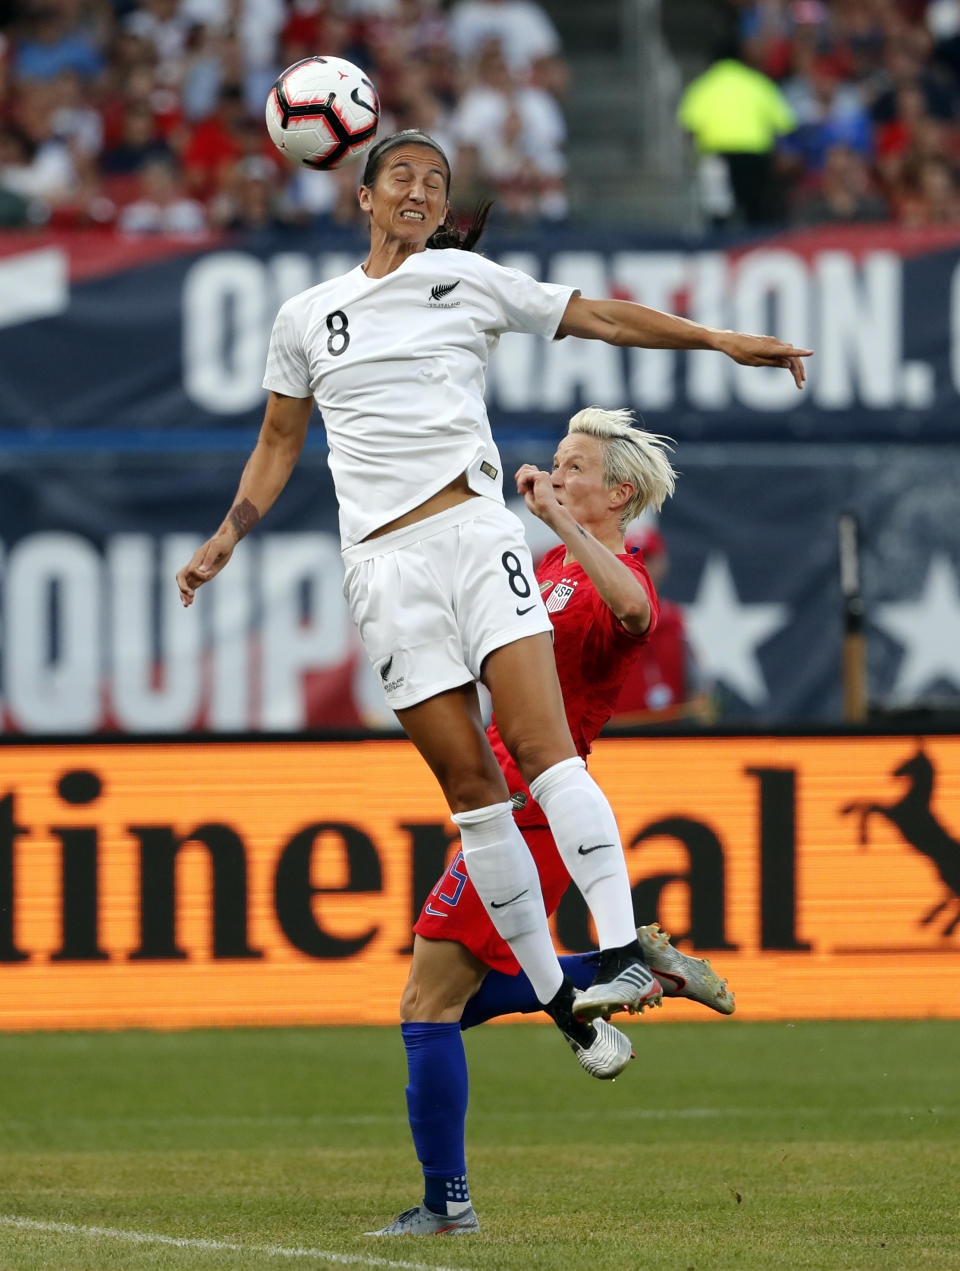 FILE - In this May 16, 2019, file photo, New Zealand's Abby Erceg (8) reaches for the ball as United States' Megan Rapinoe defends during the first half of an international friendly soccer match in St. Louis. Coach Paul Riley calls defender Abby Erceg the bedrock of the North Carolina Courage. The New Zealand native is captain of the Courage, the two-time National Women's Soccer League defending champions. (AP Photo/Jeff Roberson, File)